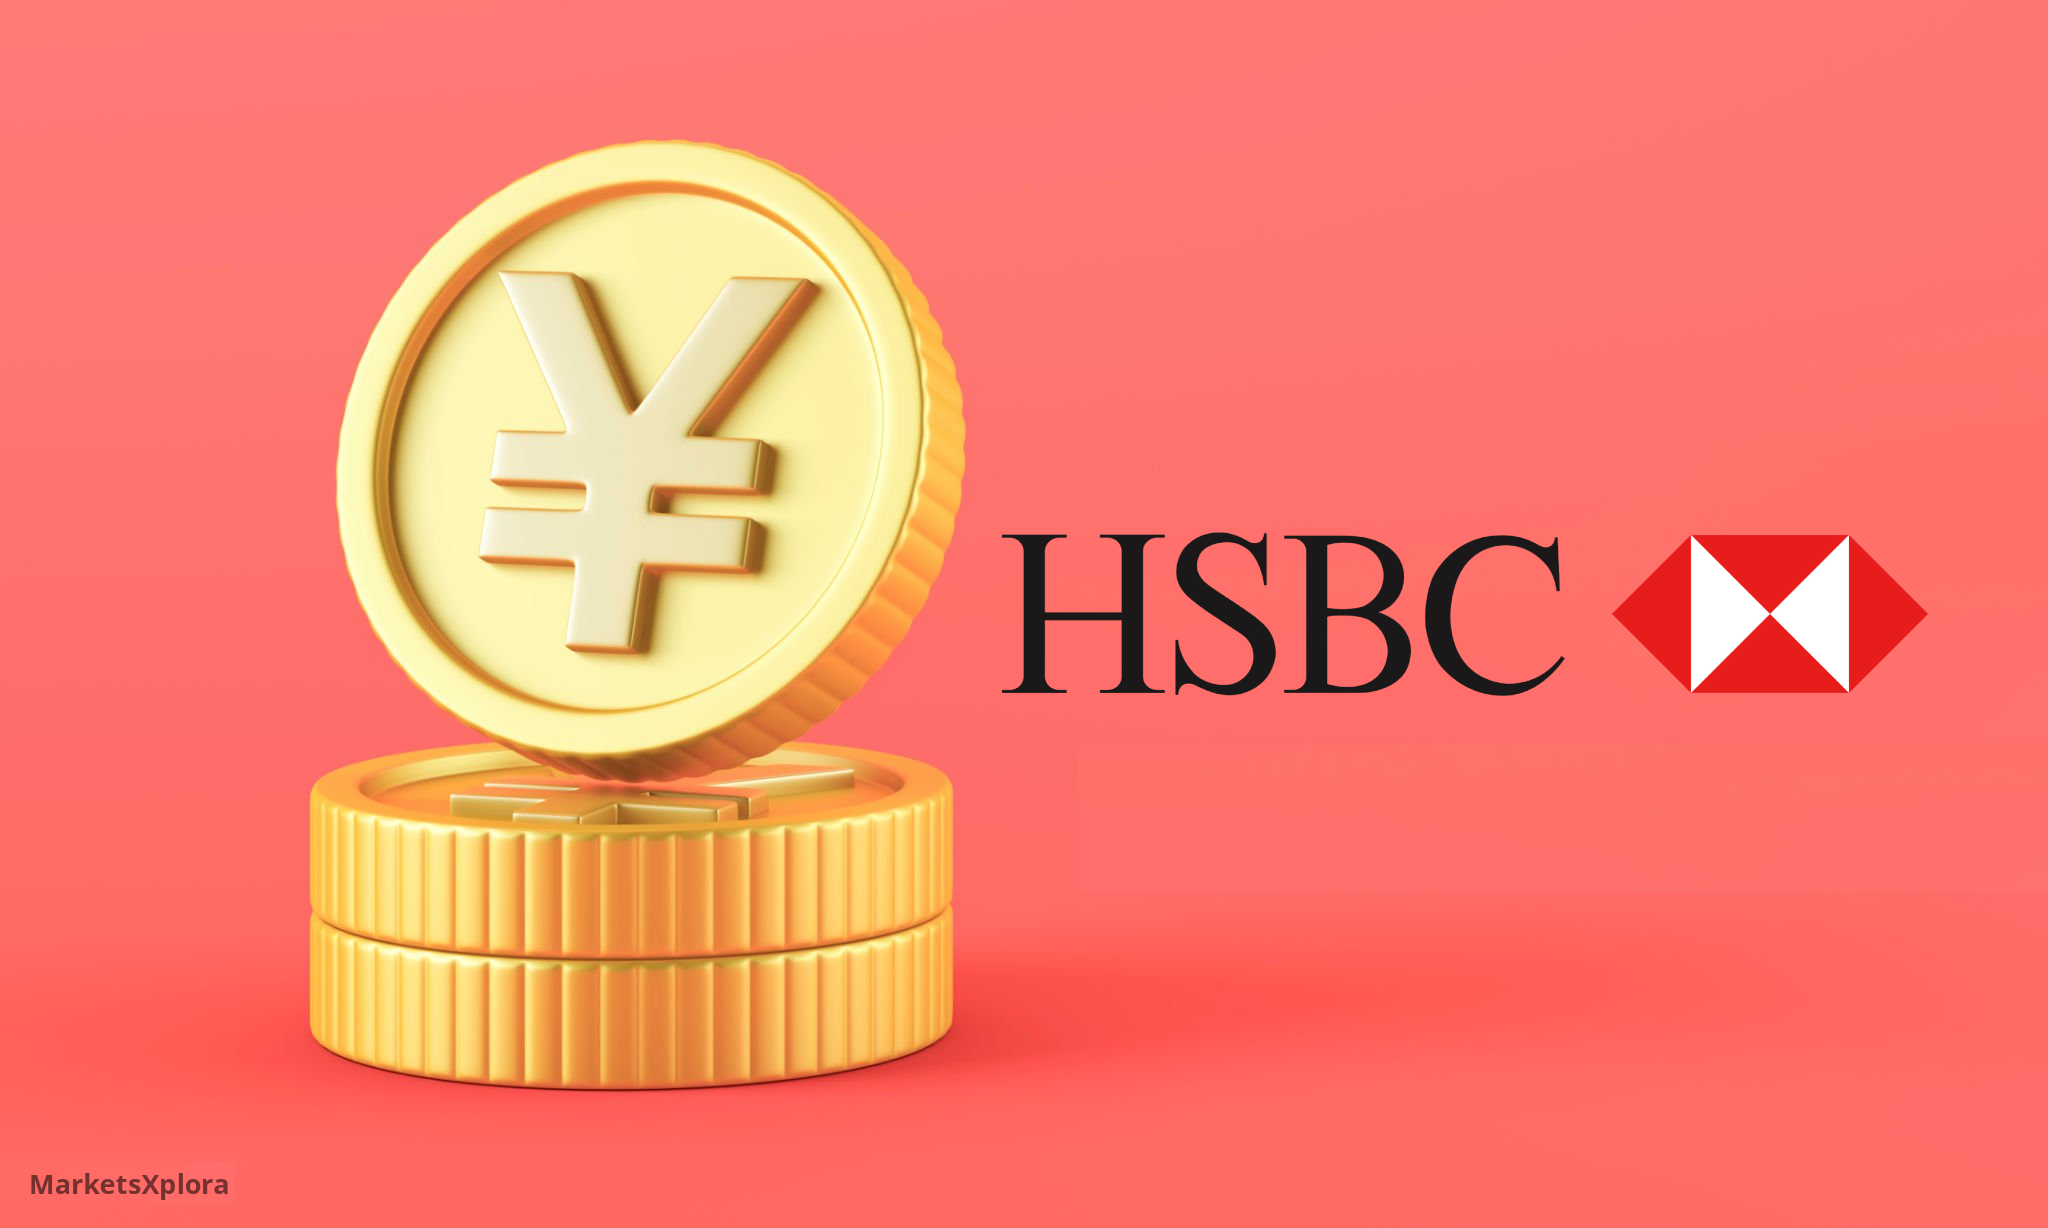 HSBC's China entity said corporate clients can now manage digital yuan holdings by linking their bank accounts to e-CNY wallets, as China pushes adoption of its CBDC.